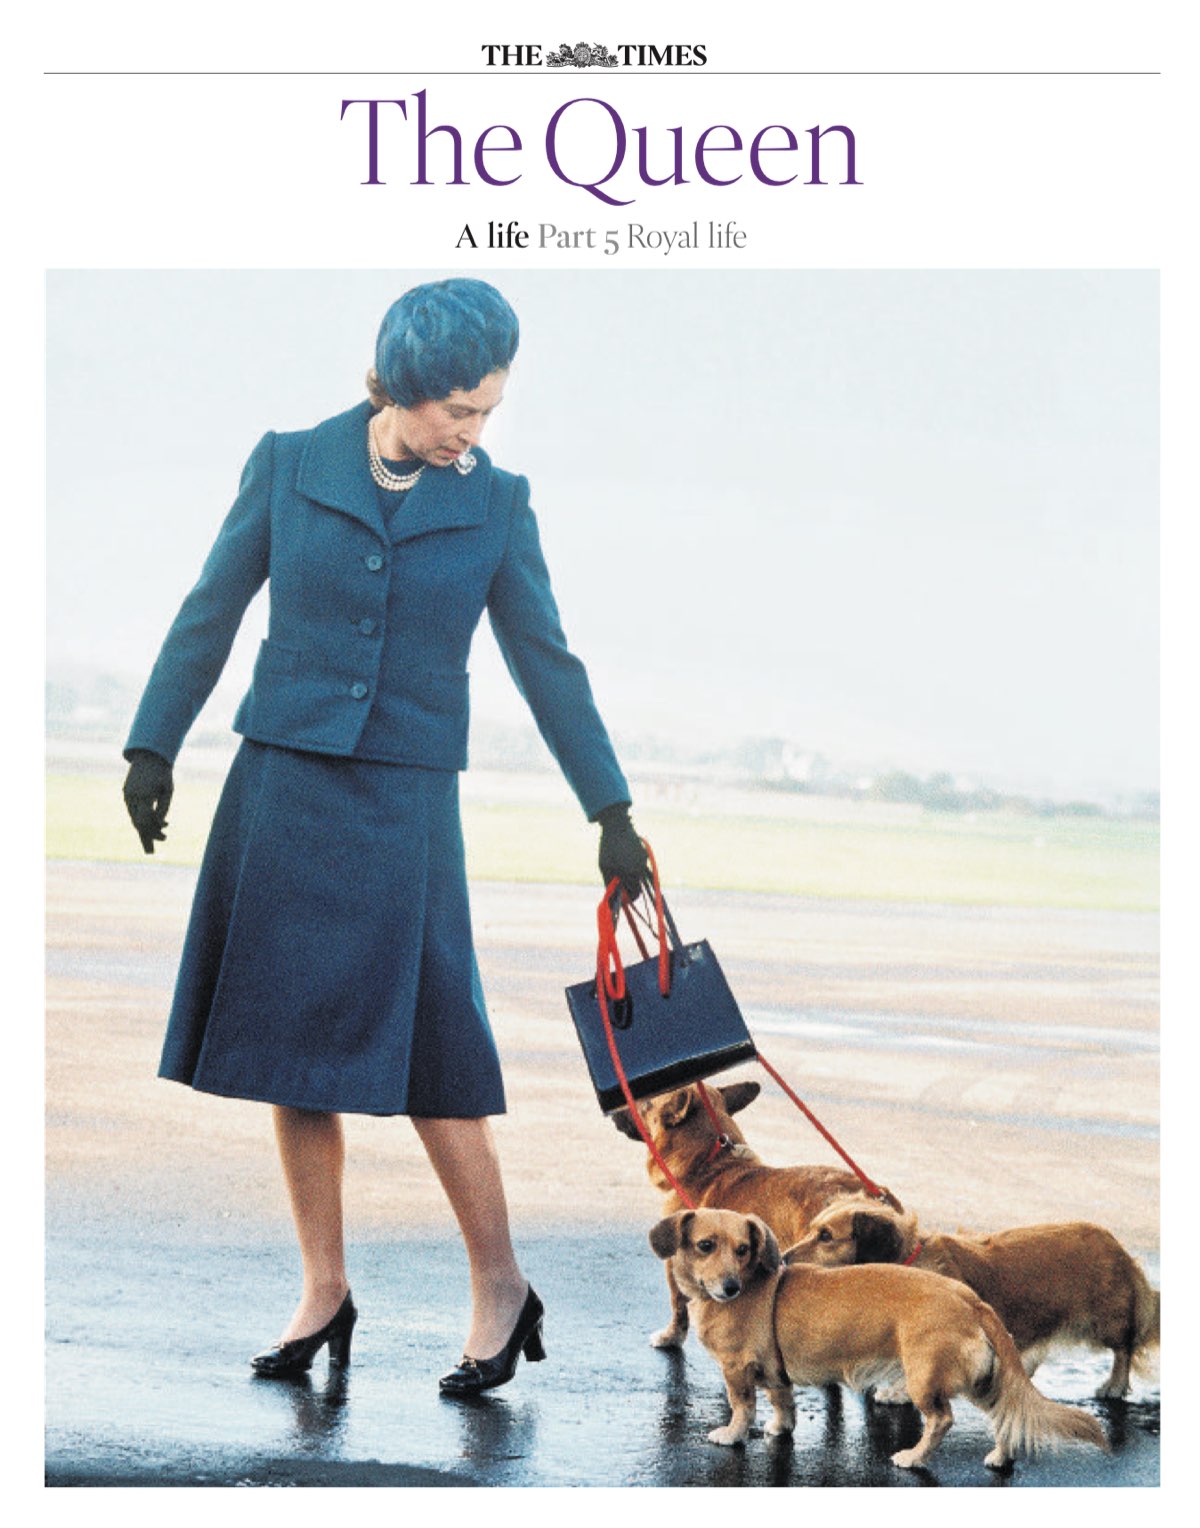 The Queen, A Life Part 5 - Royal Life [The Times, 15 Sep 2022]The Queen, A Life Part 5 - Royal Life [The Times, 15 Sep 2022]